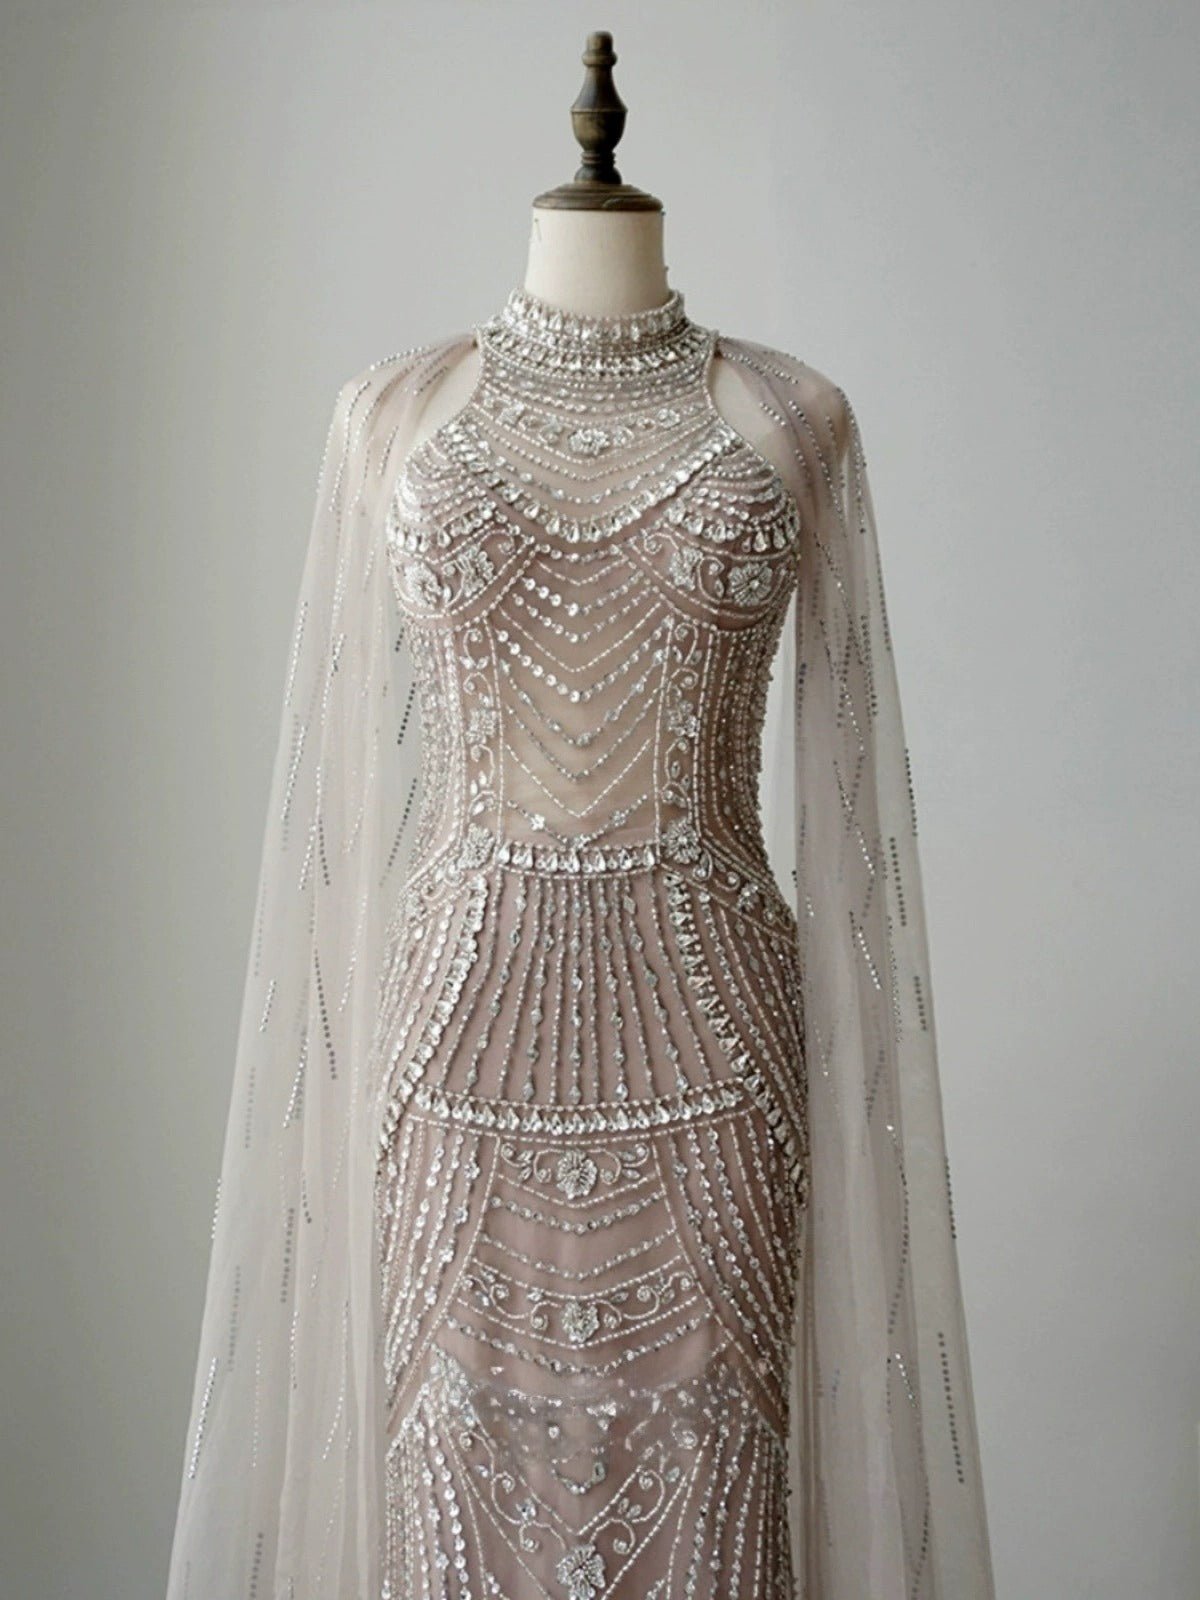 Elegant Nude Sequin and Beaded Gown - Strapless Glitter Dress - Pretty Sequin Dress with Flowing Cape Plus Size - WonderlandByLilian